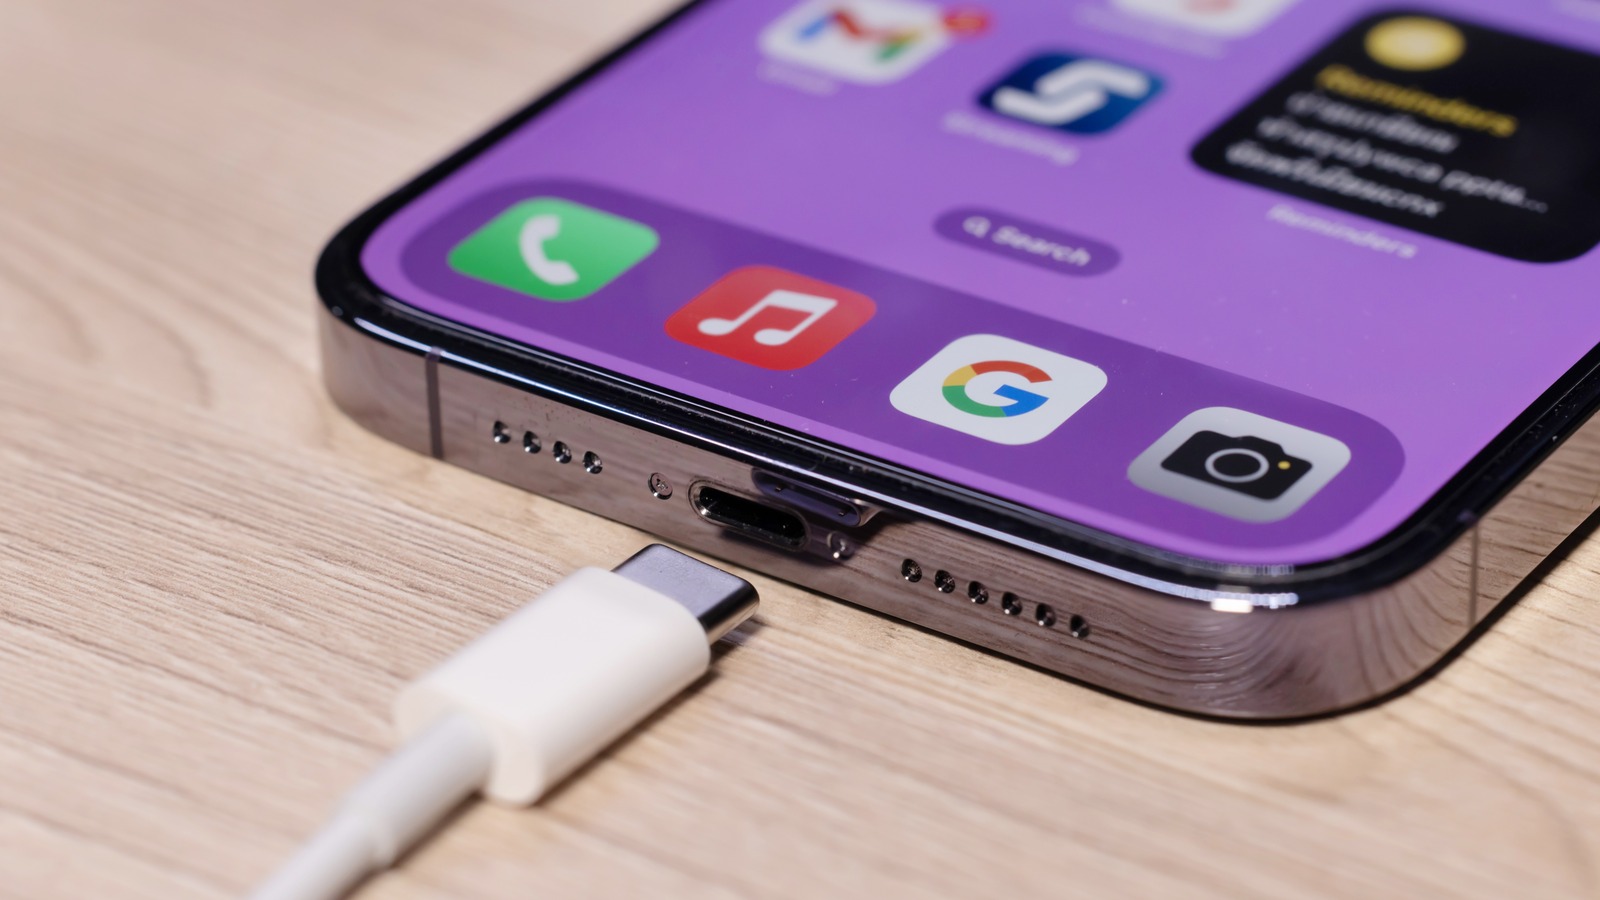 Thunderbolt Vs. USB-C Explained (And How To Tell The Difference) – SlashGear